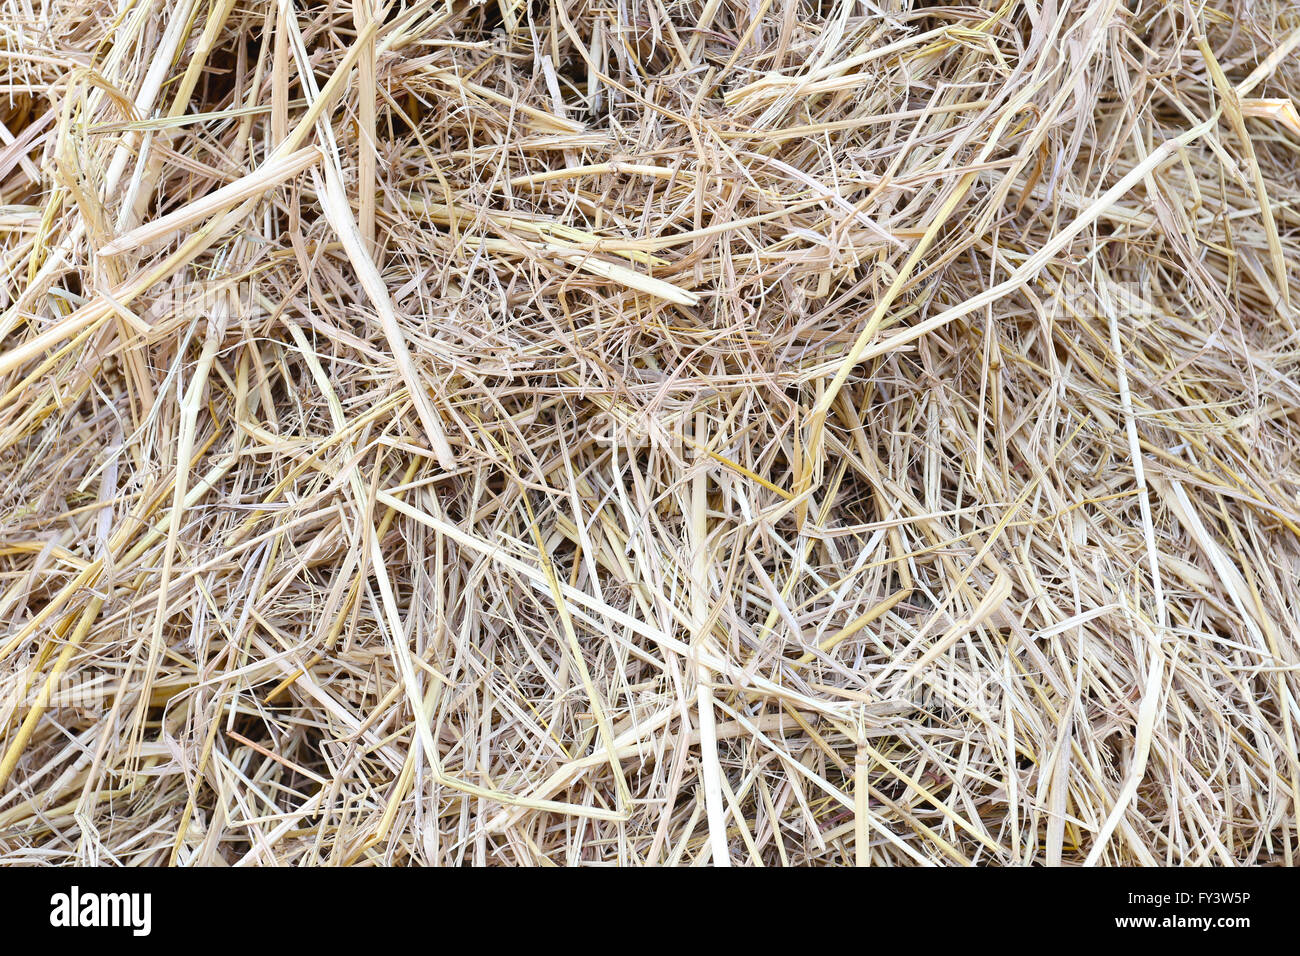 stack straw or haystack for nature abstract background. Stock Photo